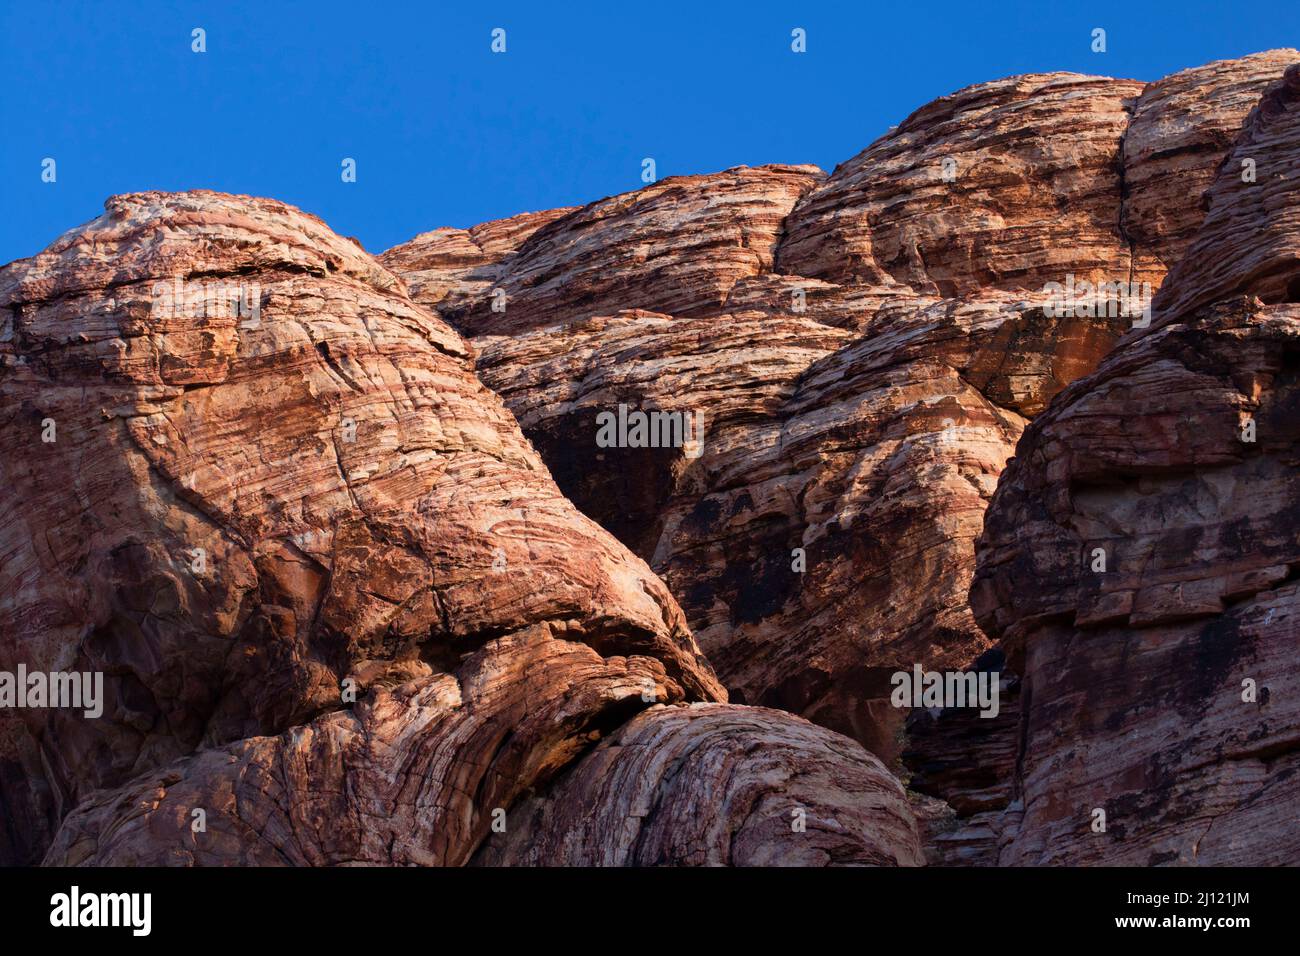 Sandstone outcrop at Calico Hills, Red Rock Canyon National Conservation Area, Nevada Stock Photo